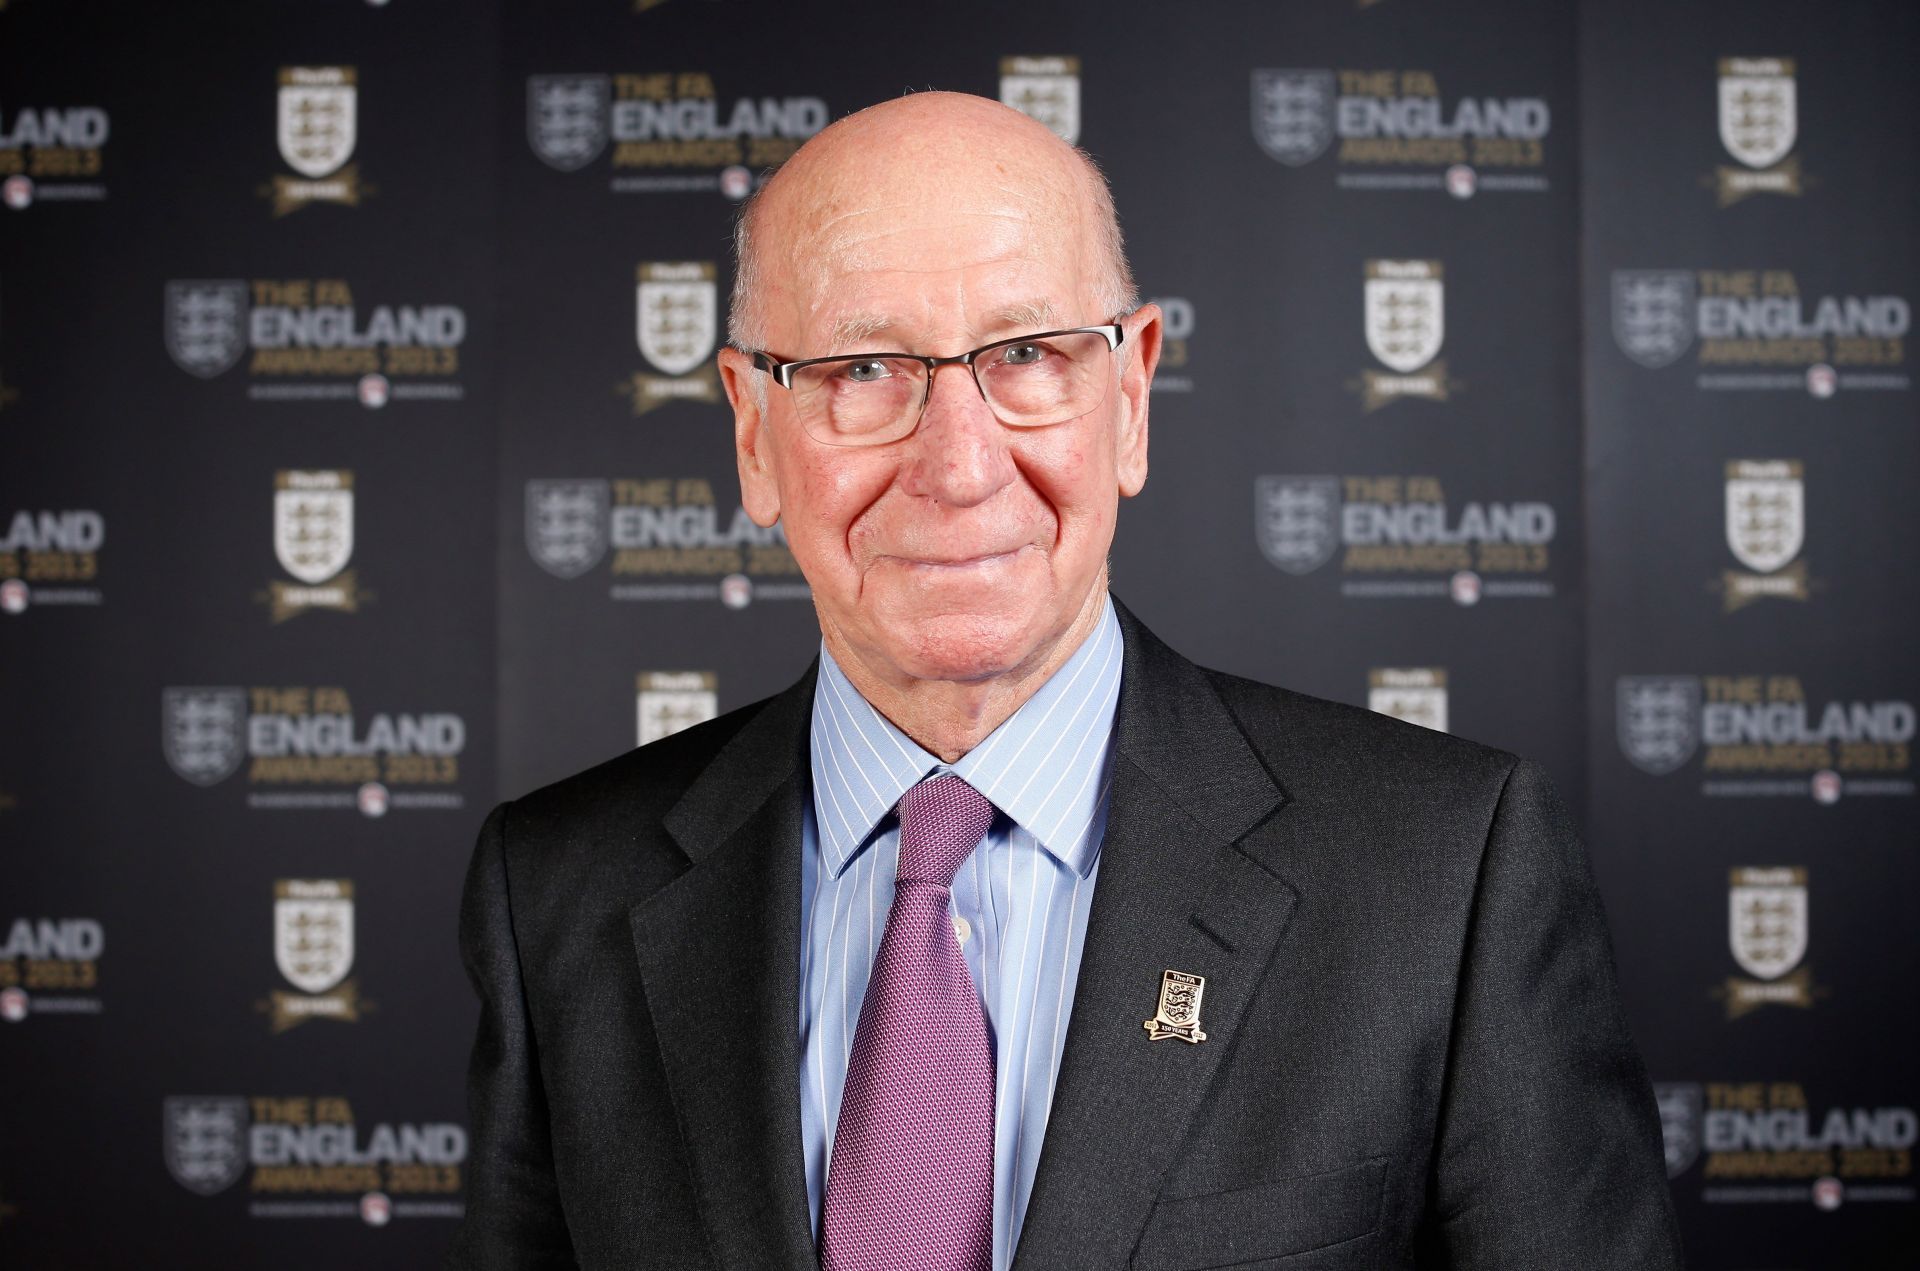 Sir Charlton was called up to the national side at the age of 19